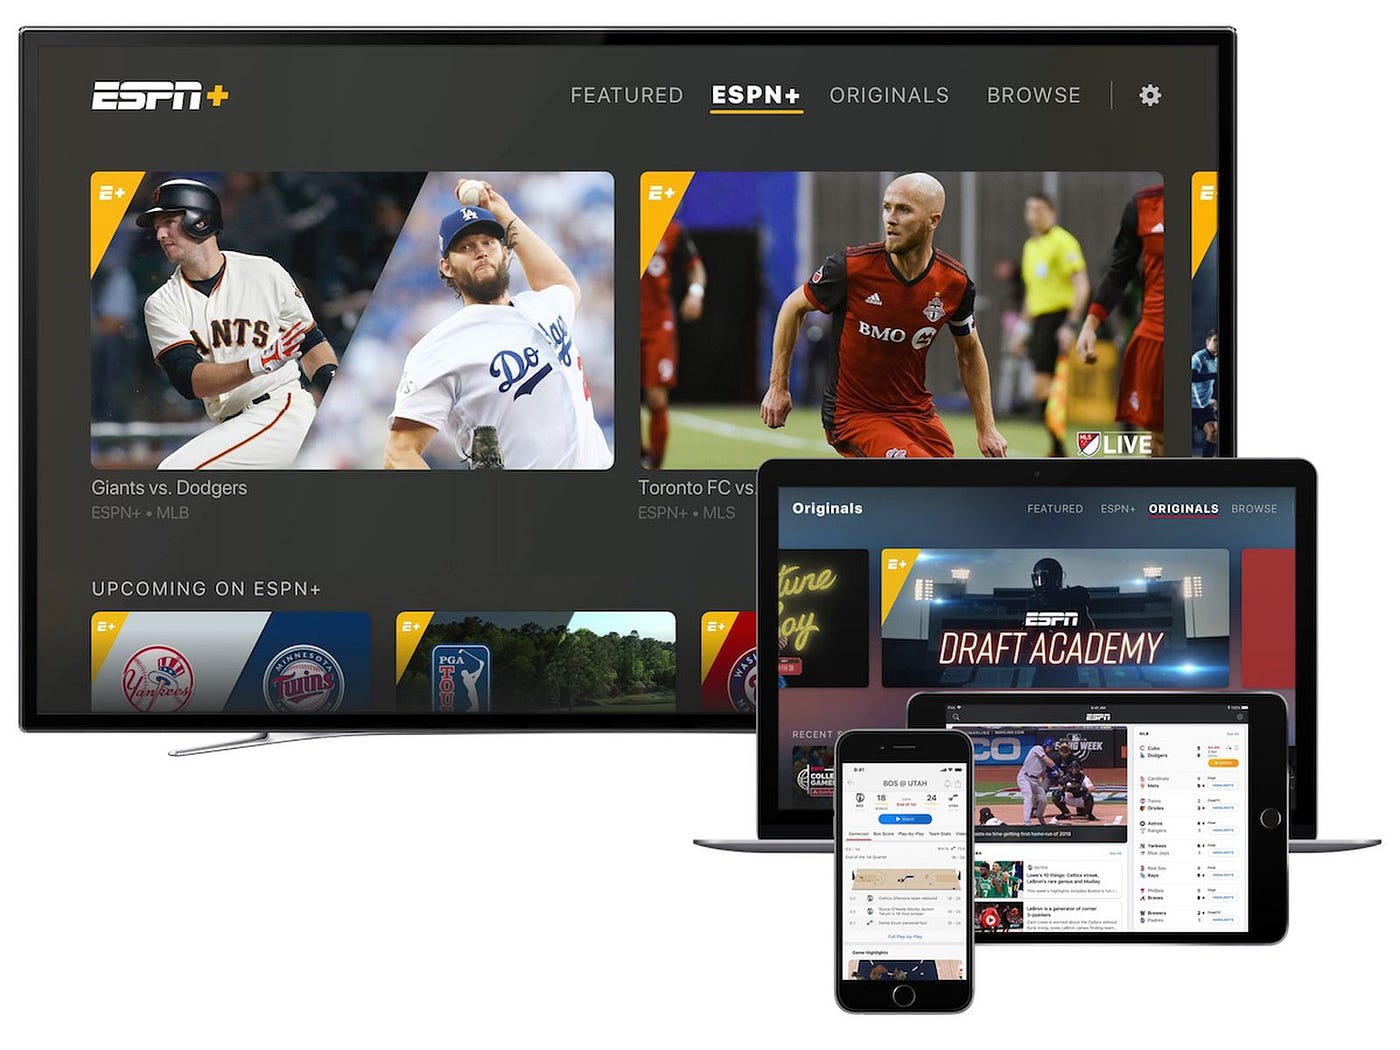 How To Watch Games On ESPN Plus